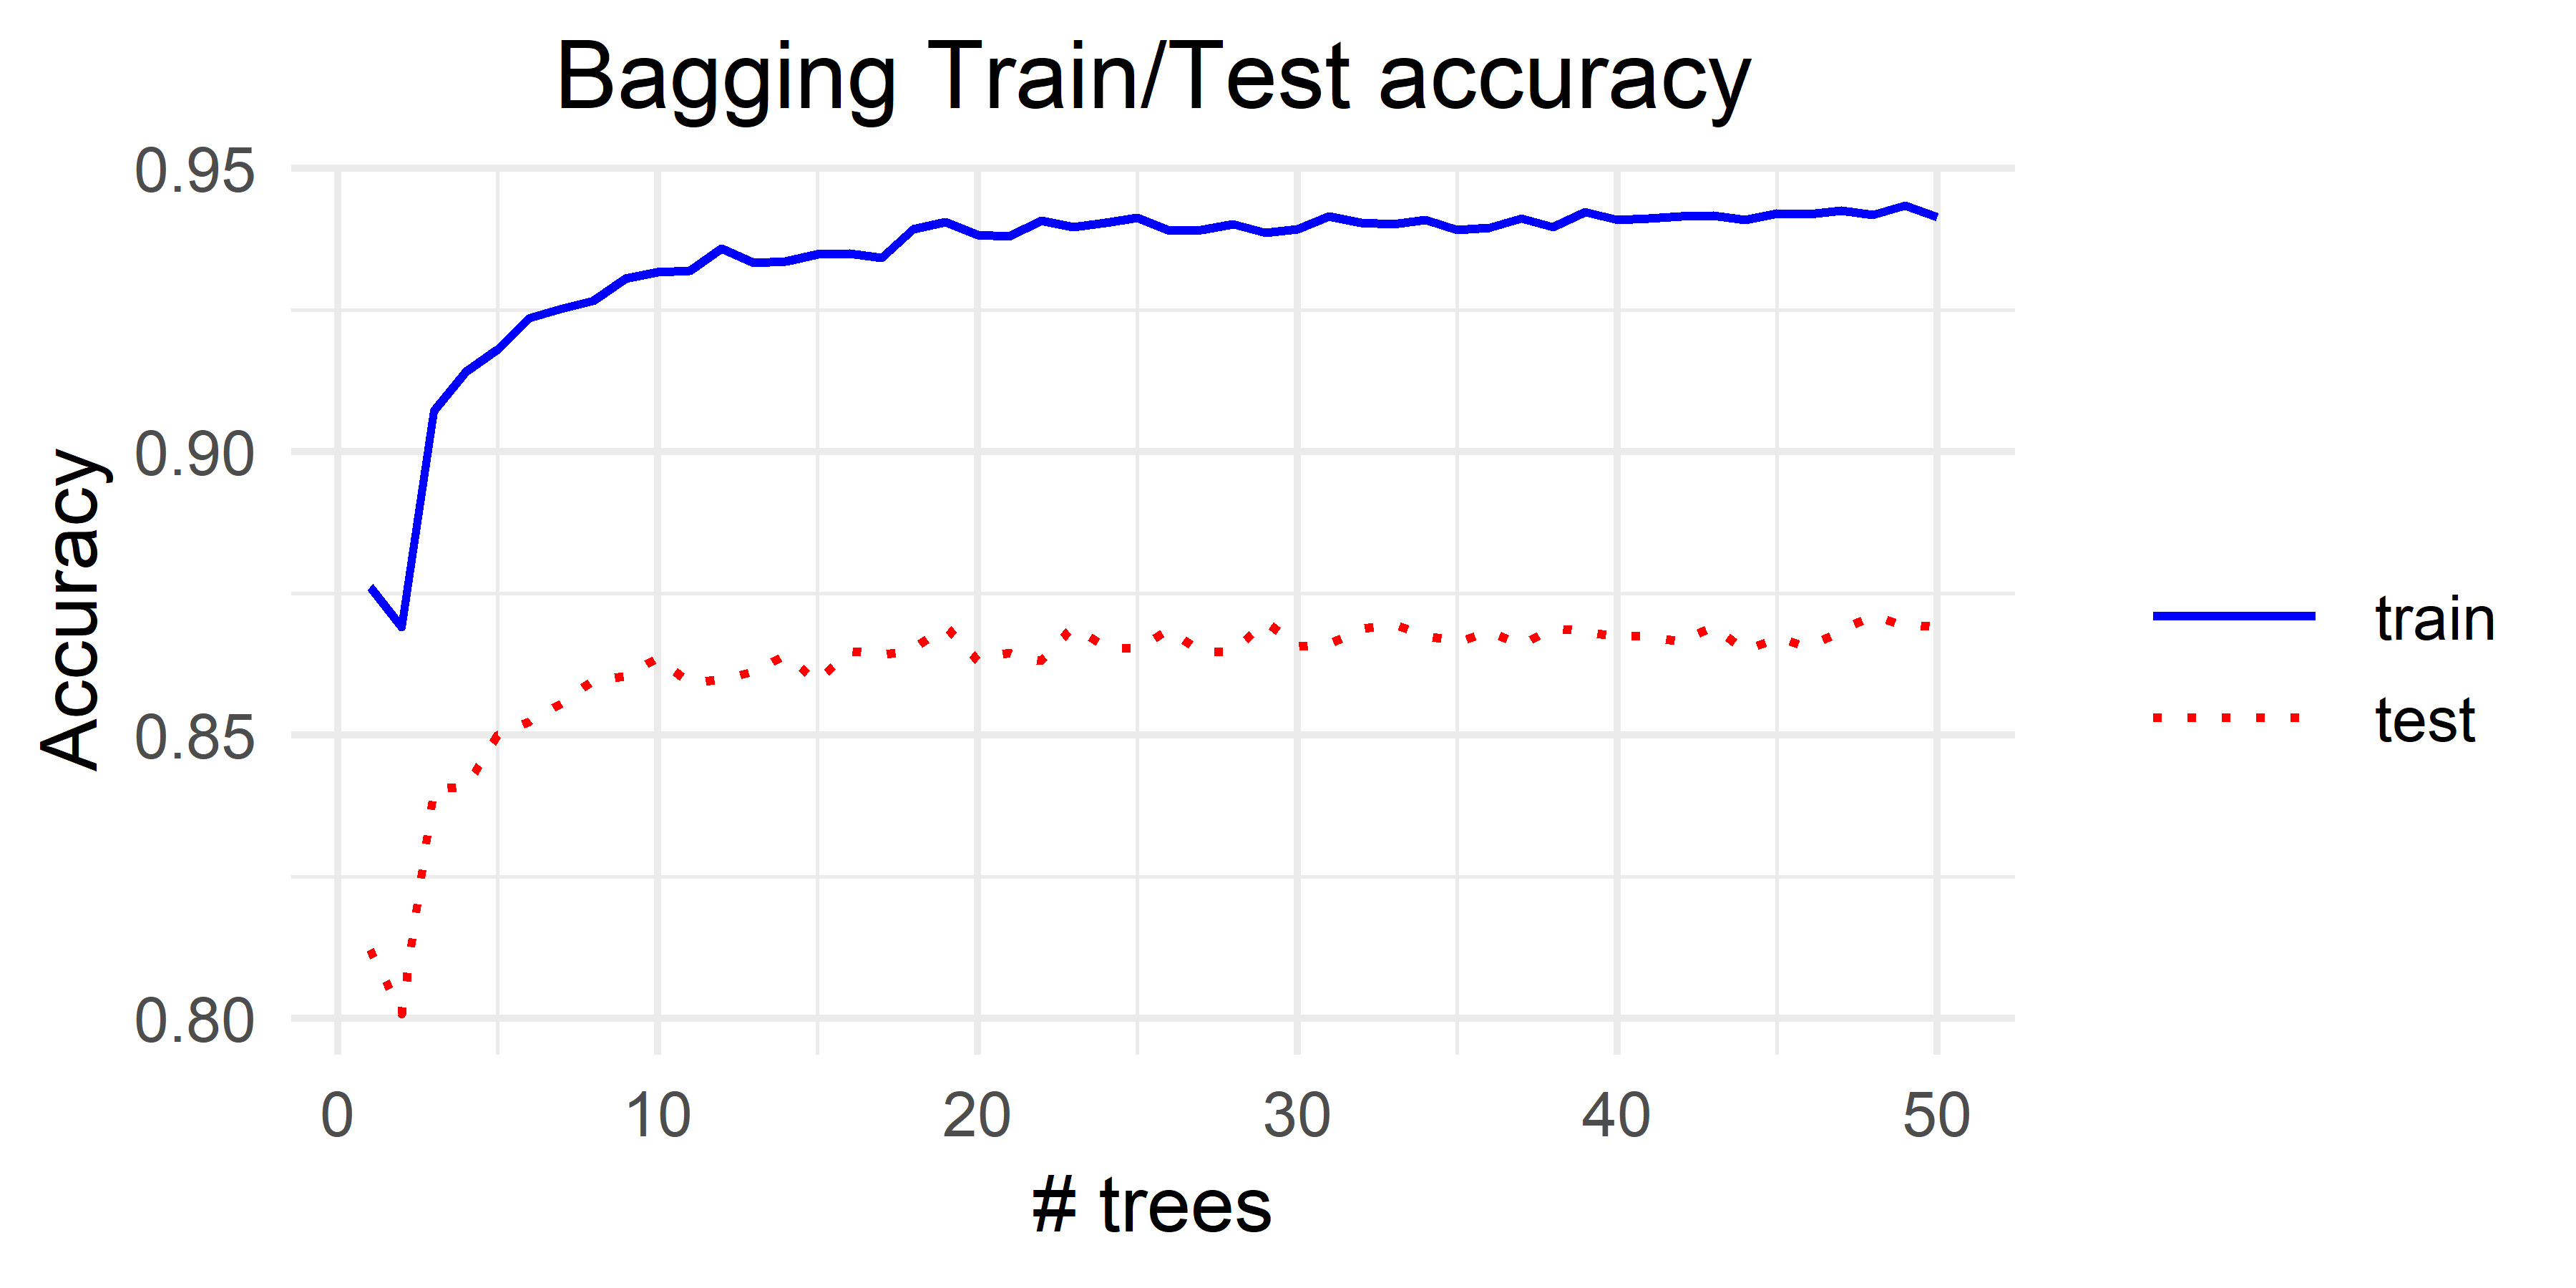 Bagging results for different number of trees.